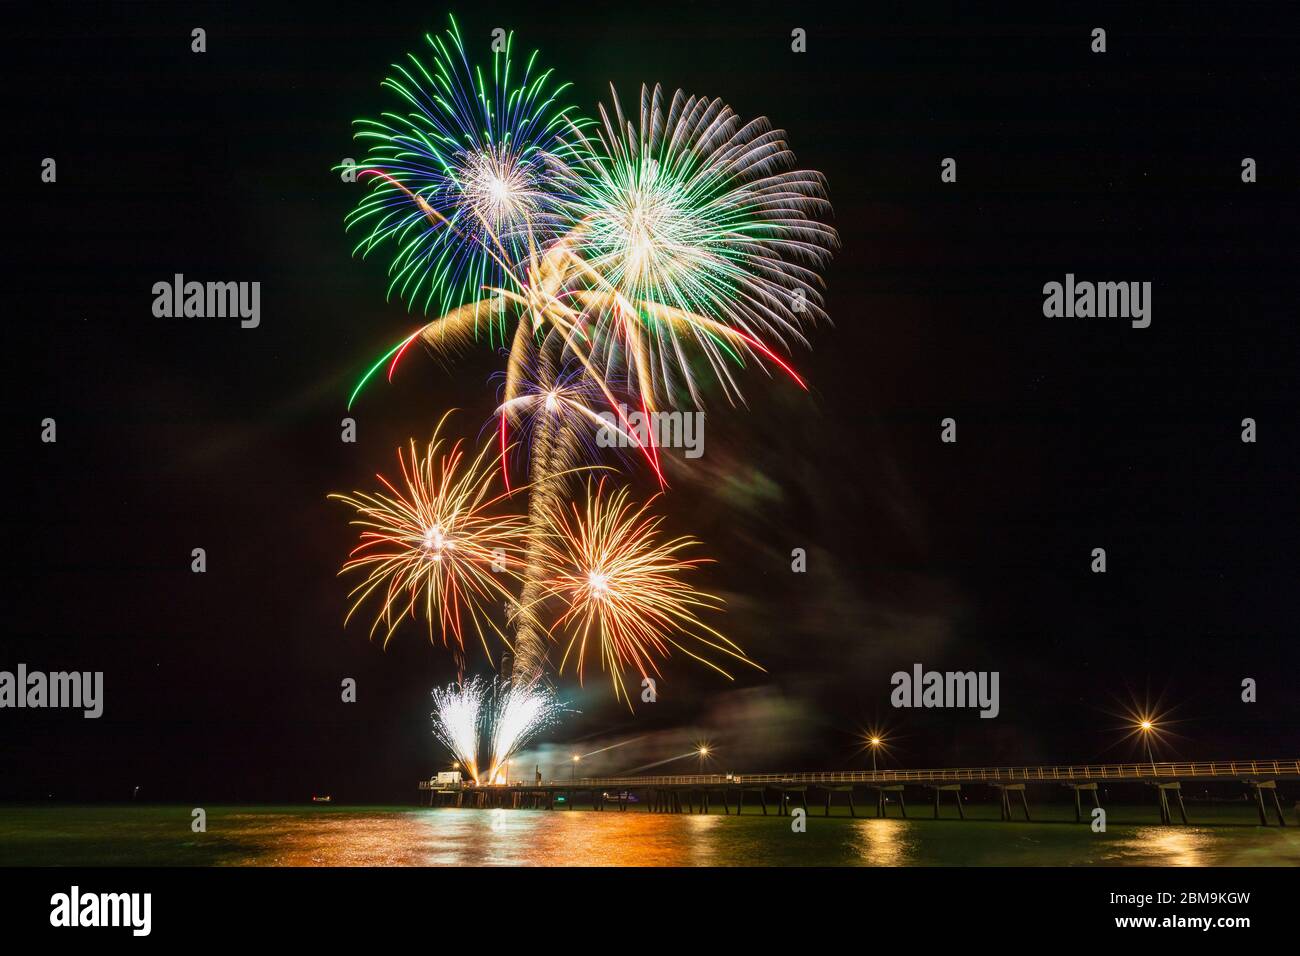 Colourful New Years Fireworks Display lighting up the sky and water off Glenelg Jetty, Adelaide, South Australia Stock Photo